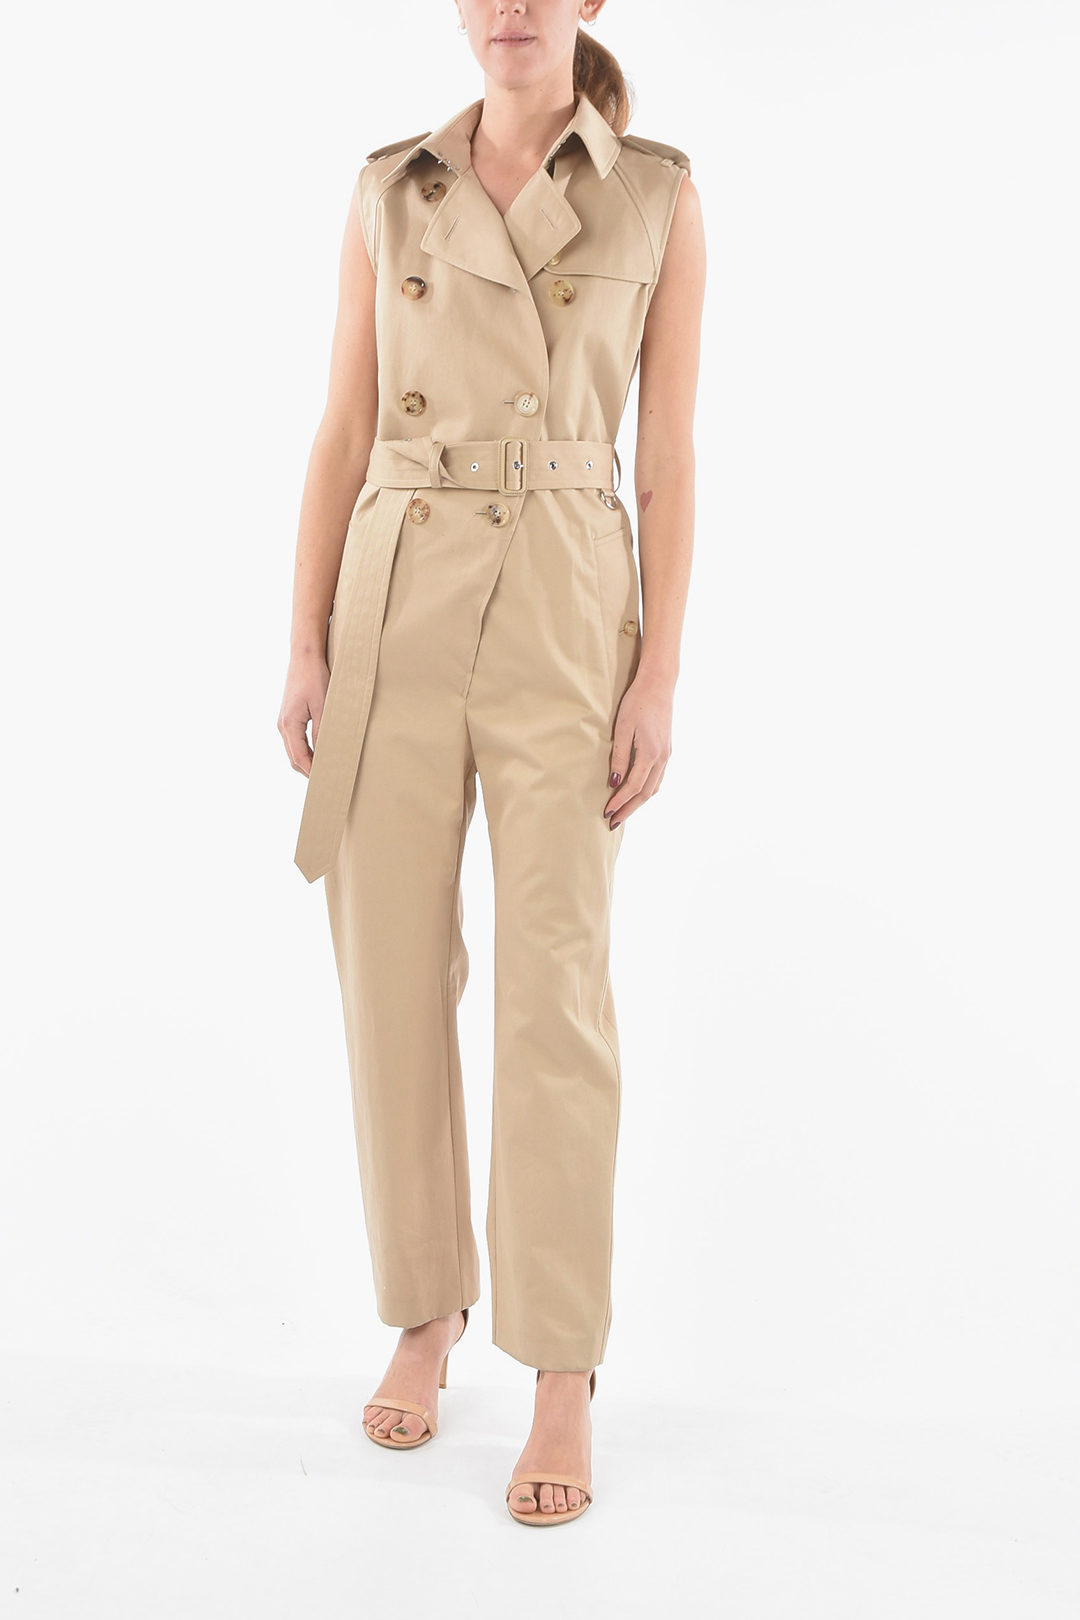 Burberry Sleeveless Utility Jumpsuit with Belt women - Glamood Outlet